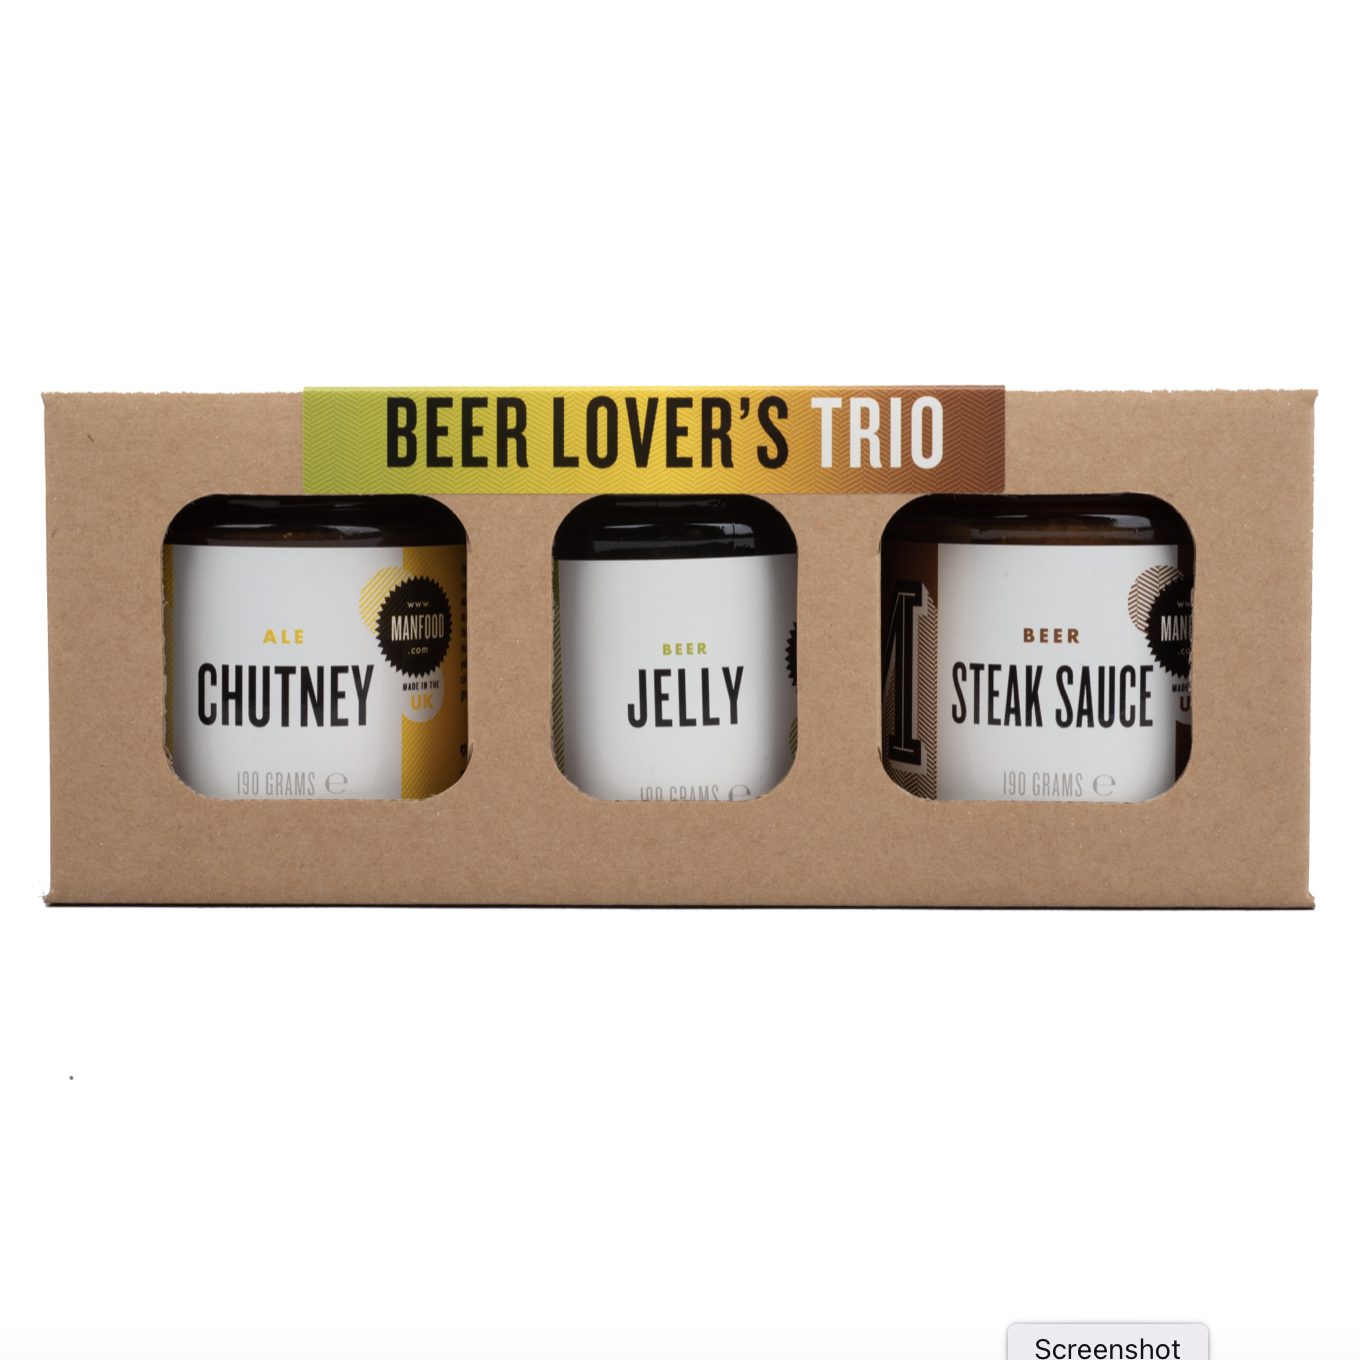 Beer trio gift box